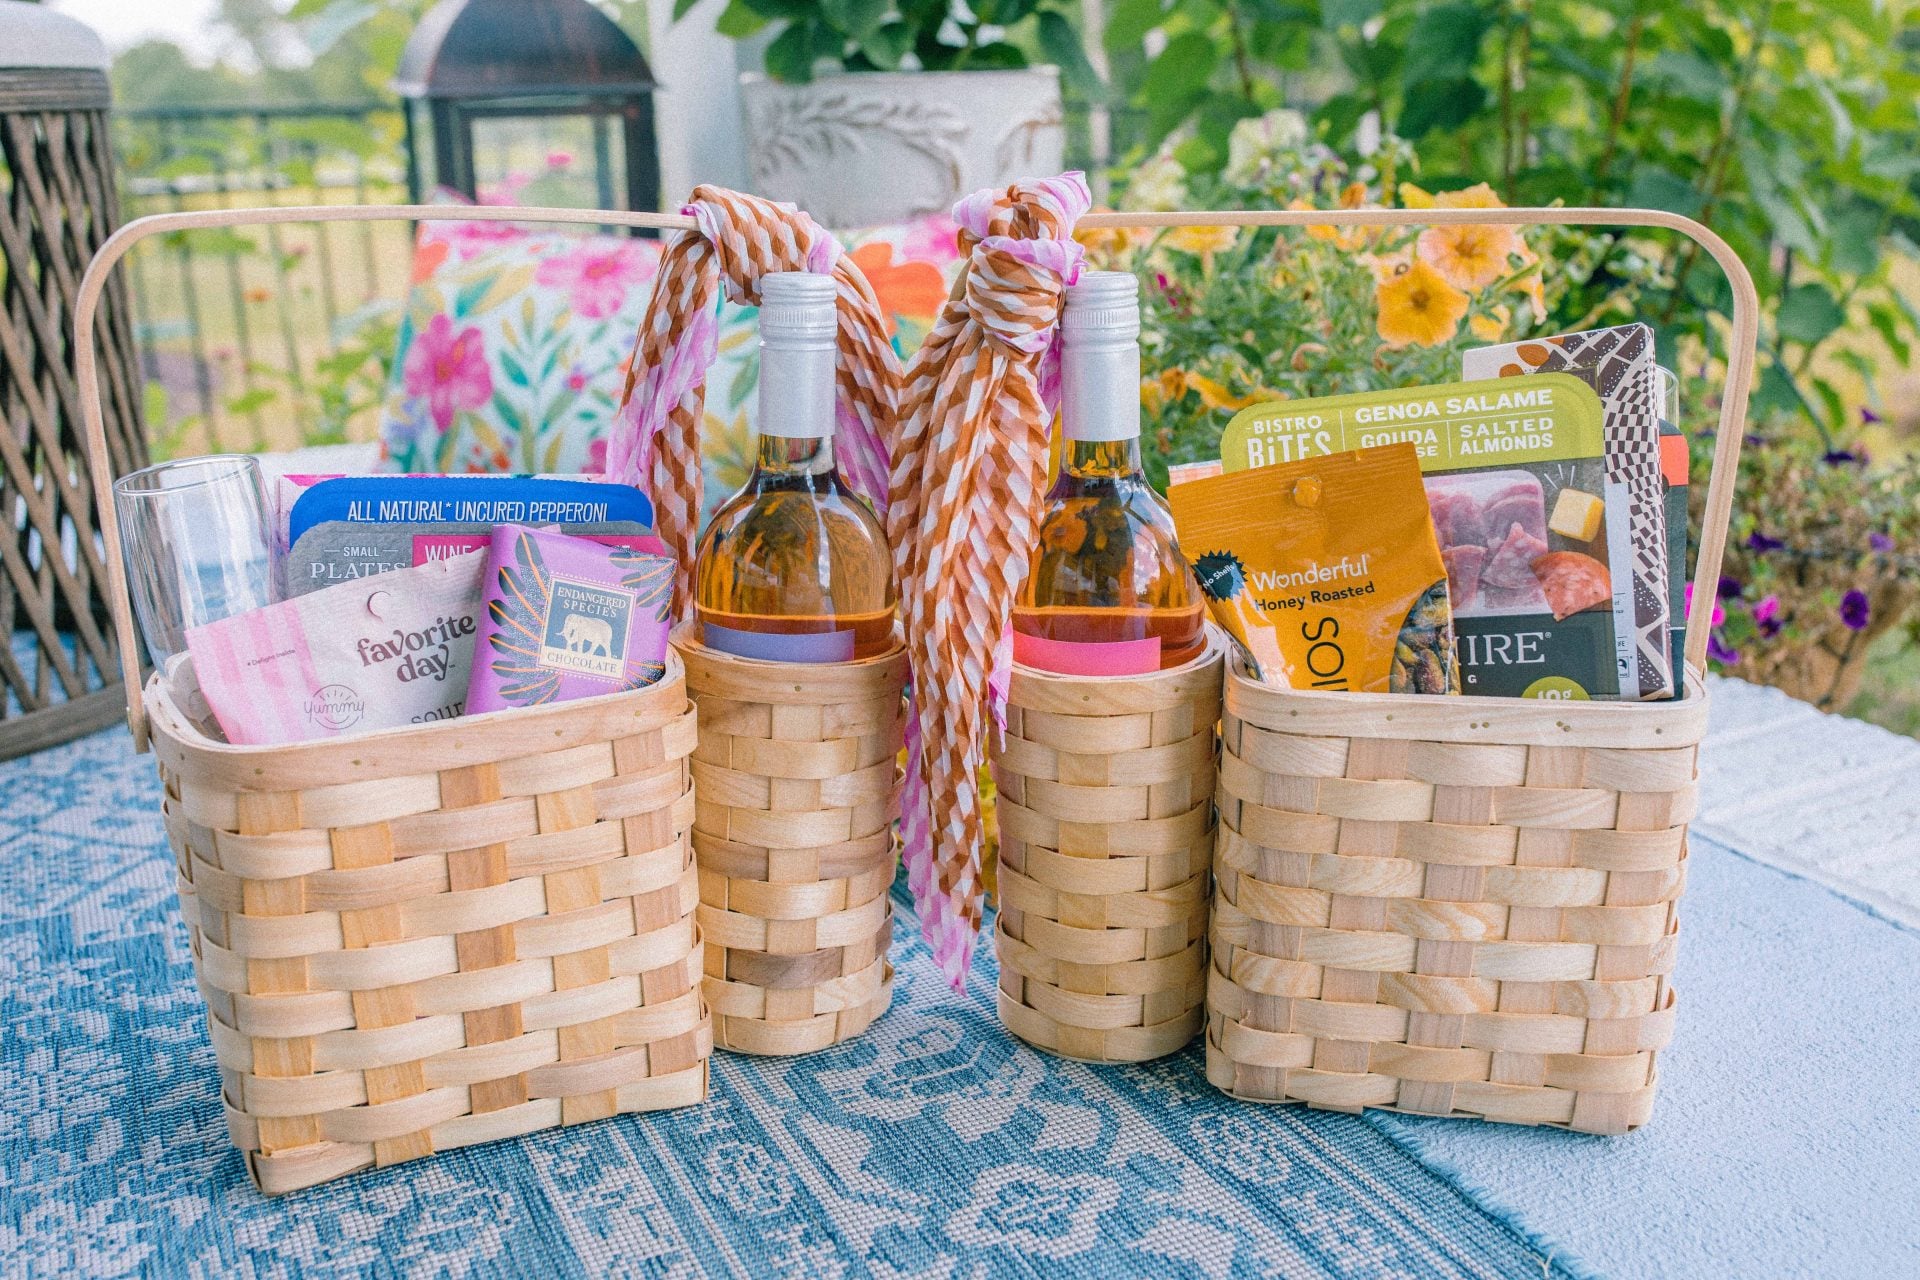 The Best Picnic Baskets on the Market in 2020